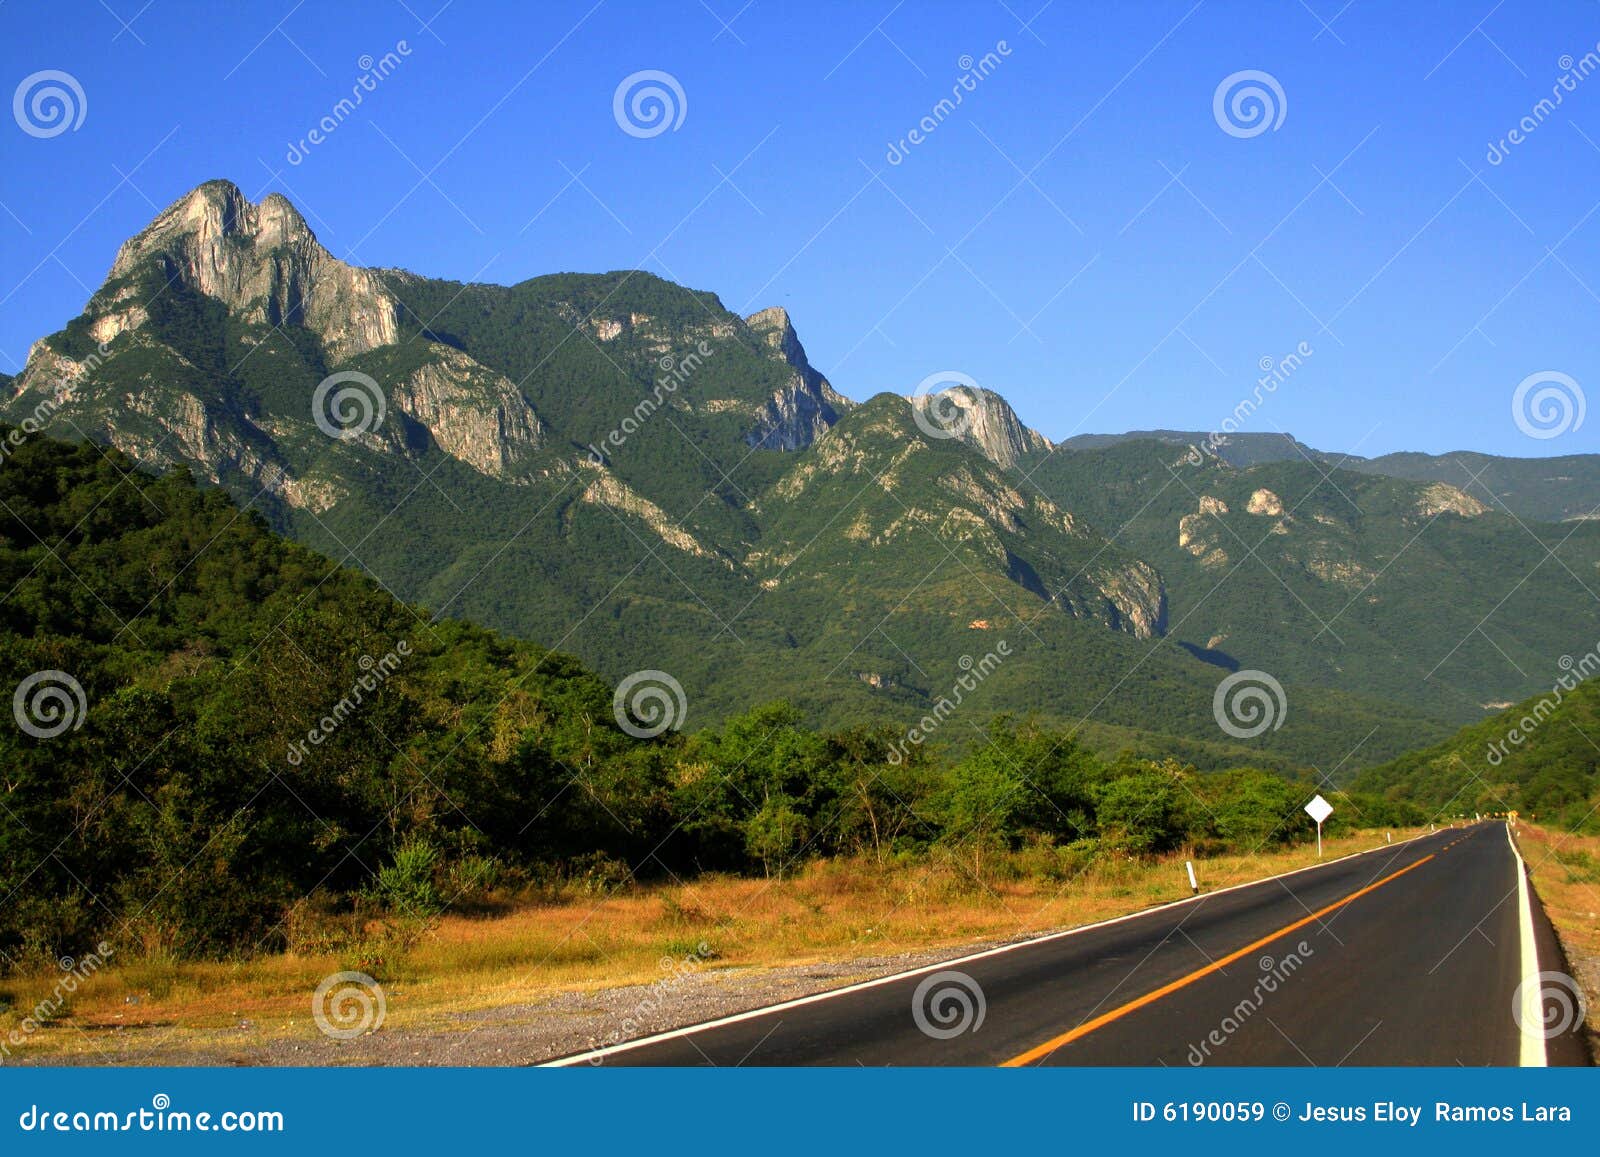 mountains and road in nuevo leon, mexico iii